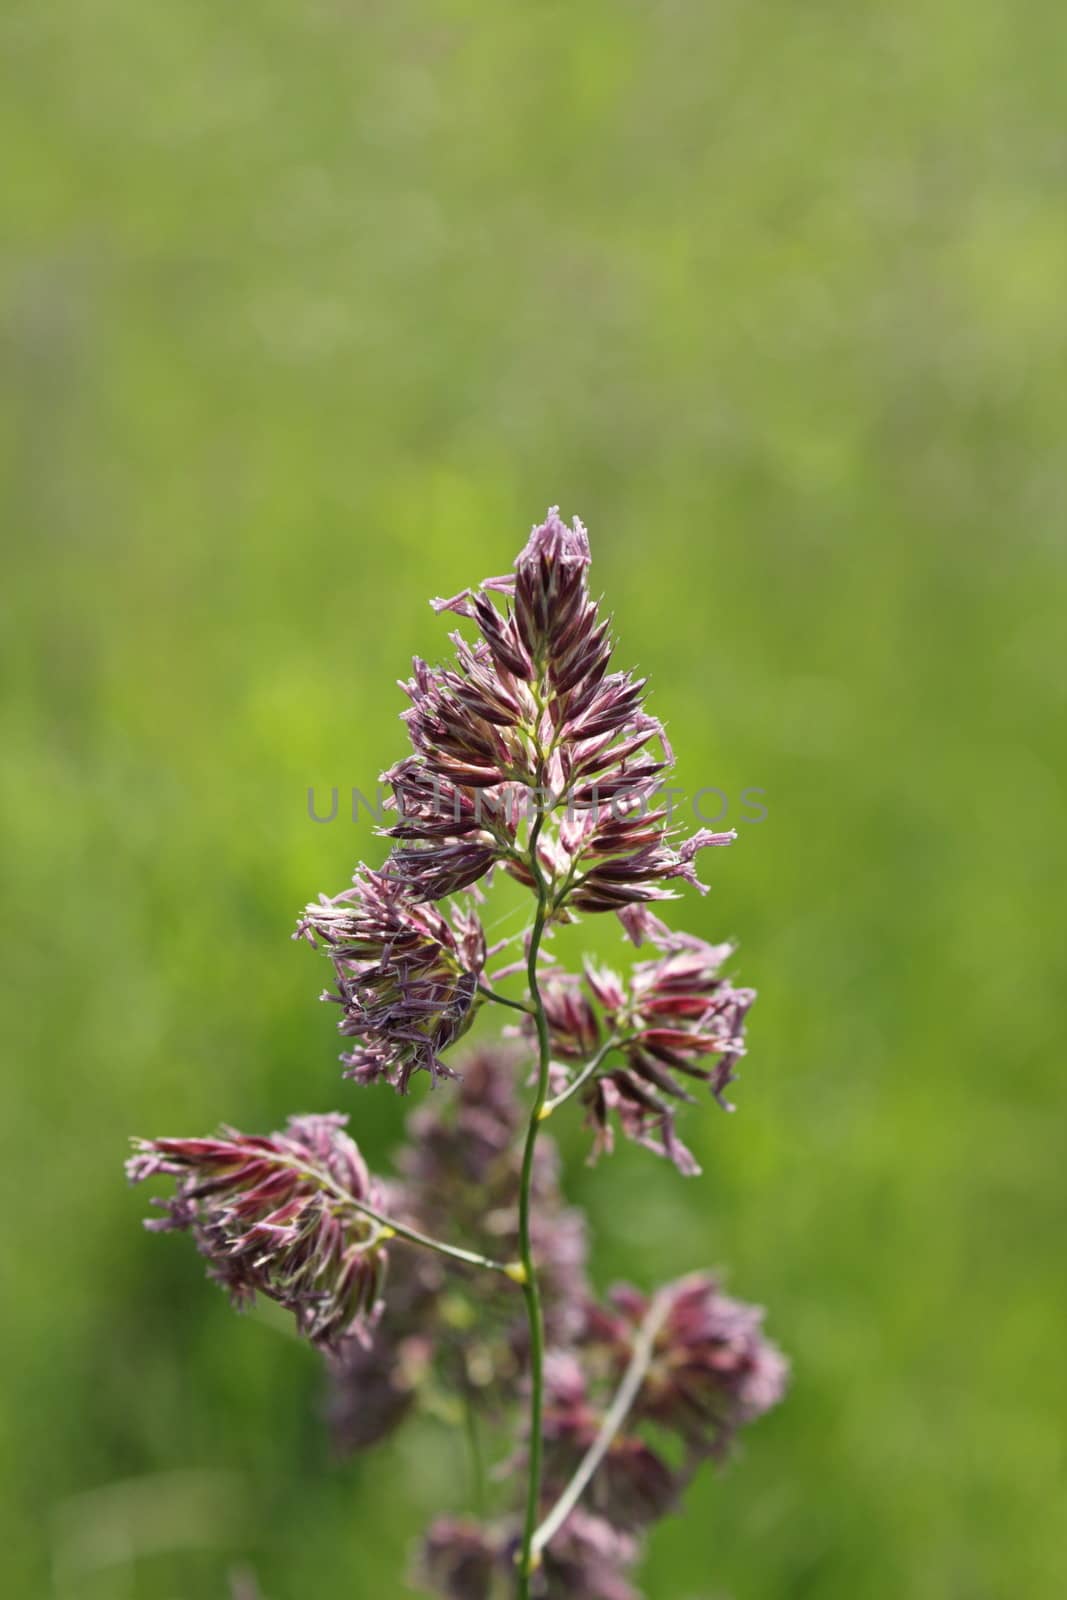 detail of wild grass inflorescence over blurred green background